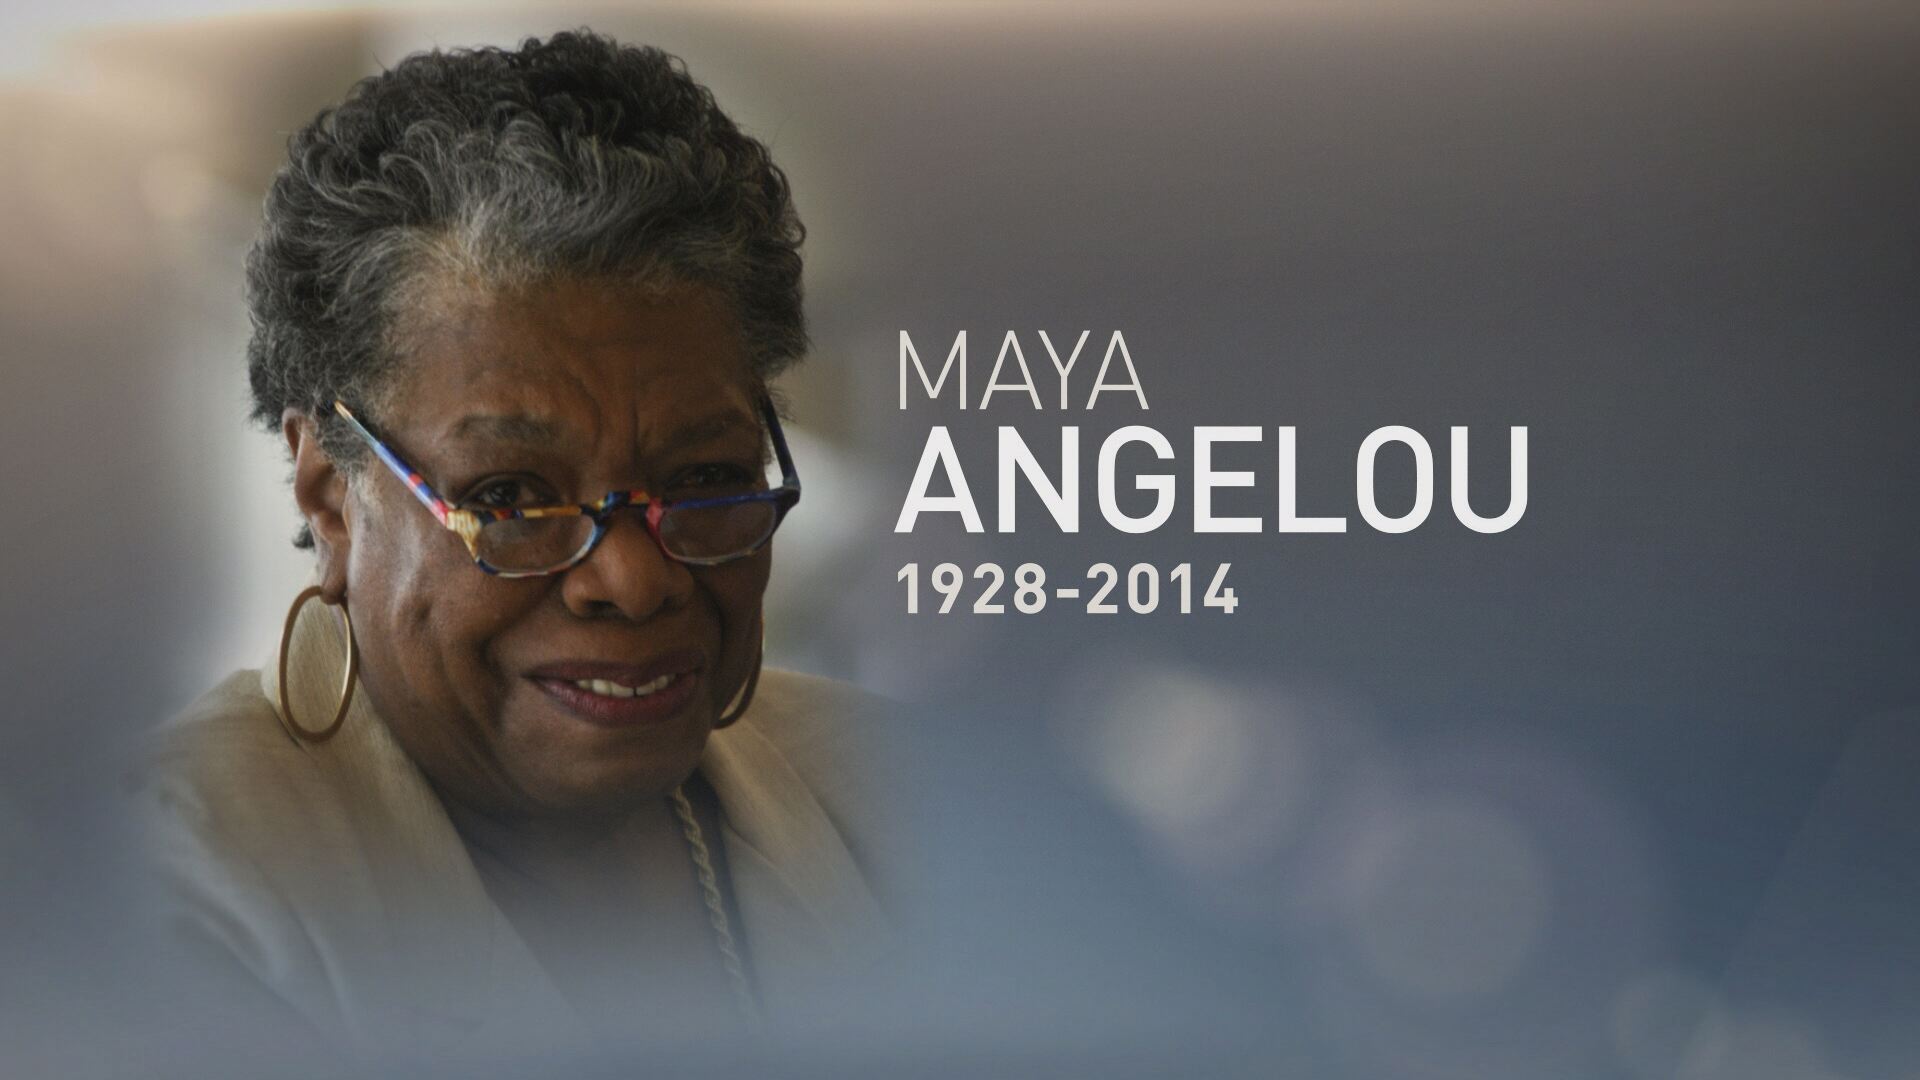 Maya Angelou's connection to East Tennessee | wbir.com